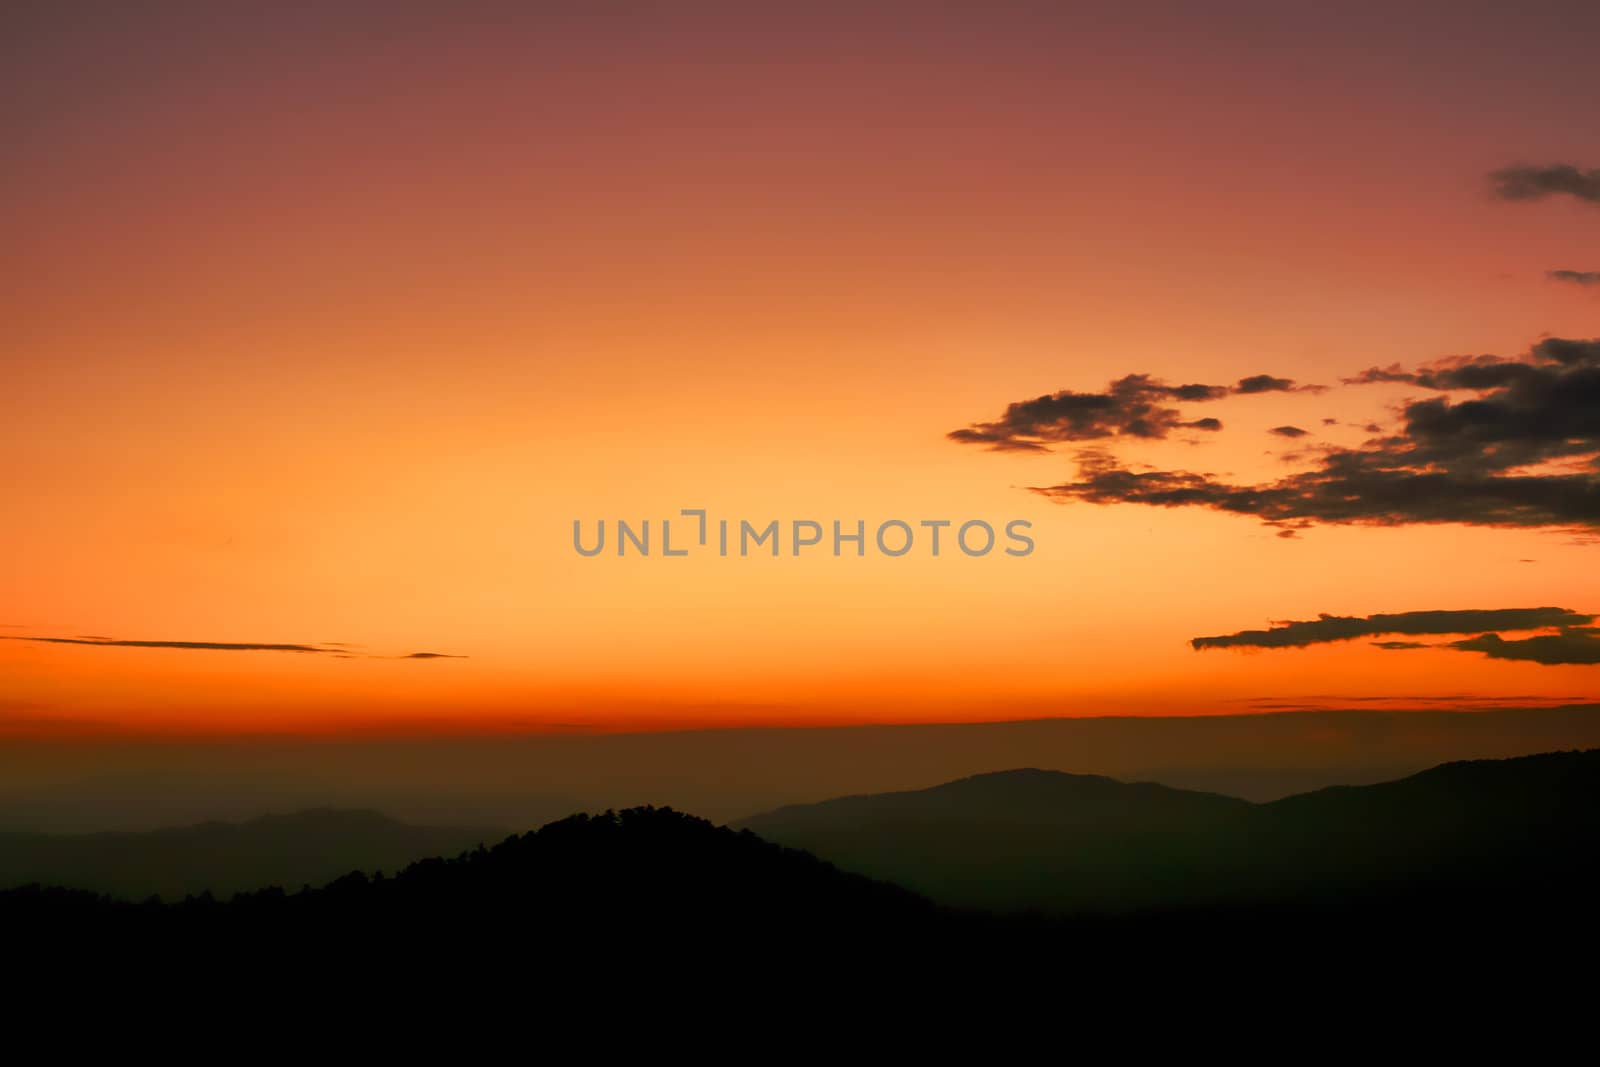 An image of a sunrise in mountains